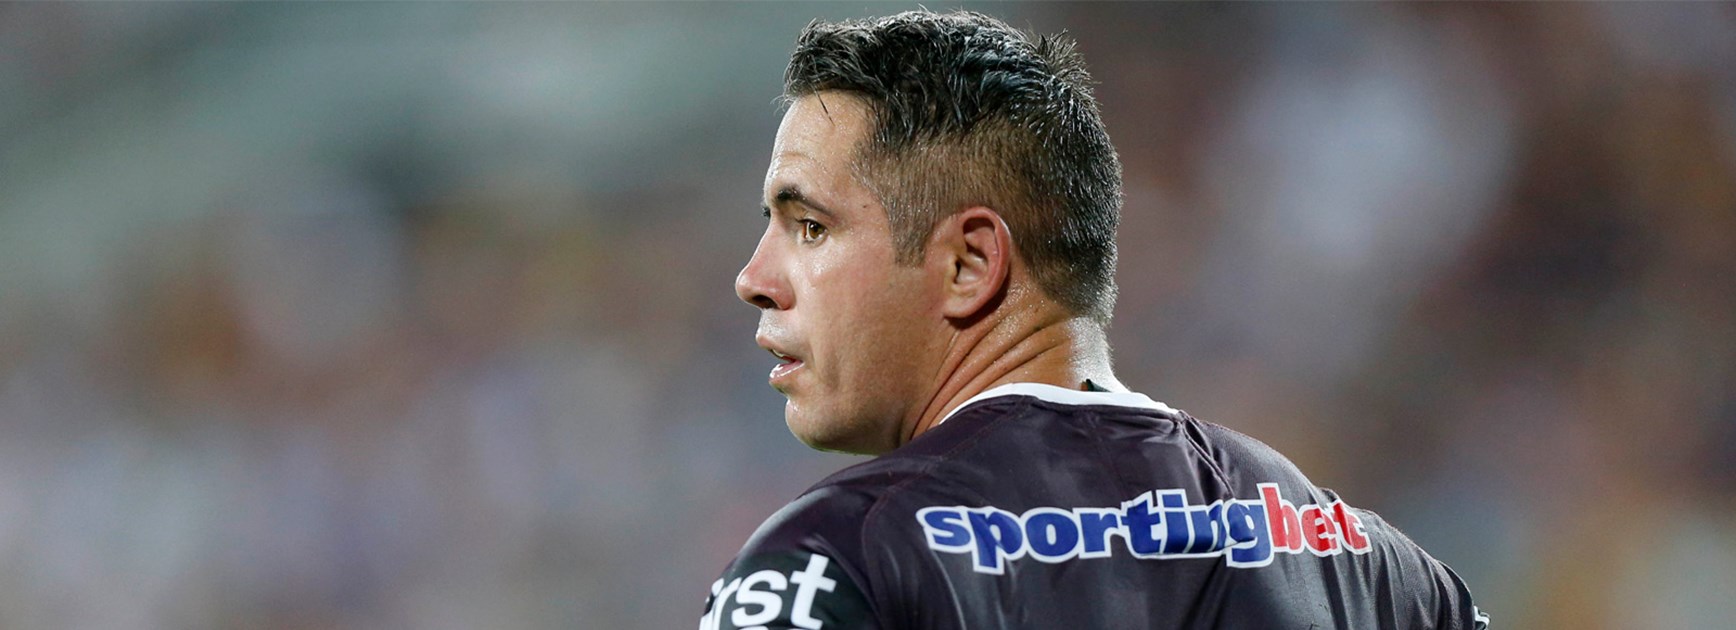 NRL Fantasy legend Corey Parker has been rested by the Broncos this week.